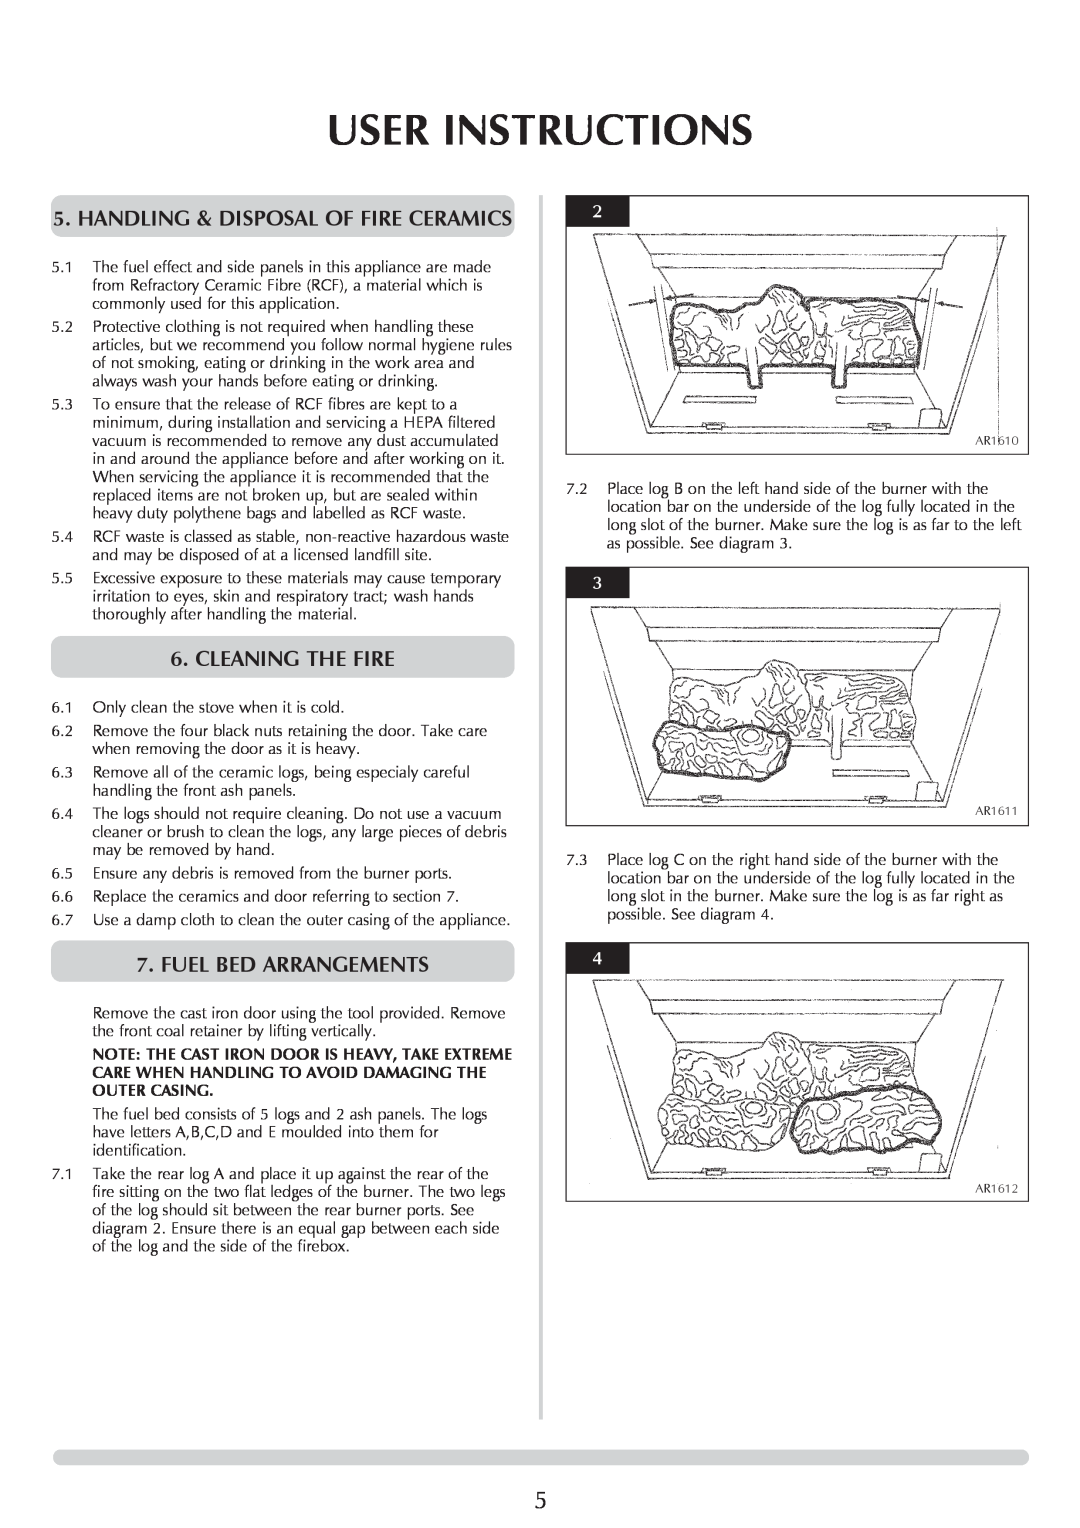 Stovax Ceramica Manhattan Wood Stove manual User Instructions, Handling & Disposal Of Fire Ceramics, Cleaning The Fire 